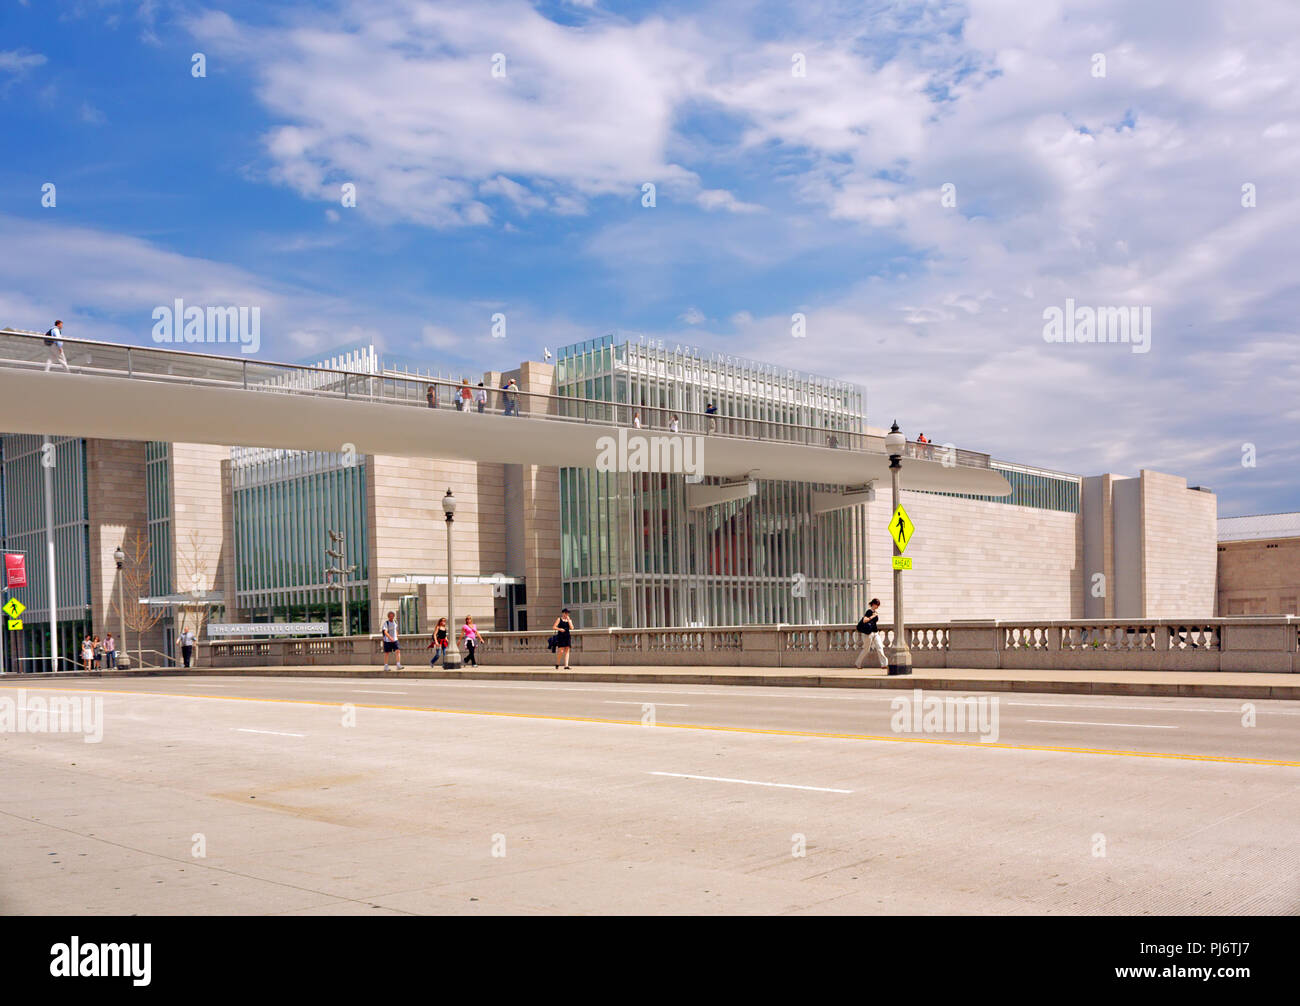 CHICAGO, ILLINOIS - JUNE 04, 2010: The Modern Wing (Art Institute of Chicago) building designed by architect Renzo Piano on June 04, 2010 in Chicago,  Stock Photo